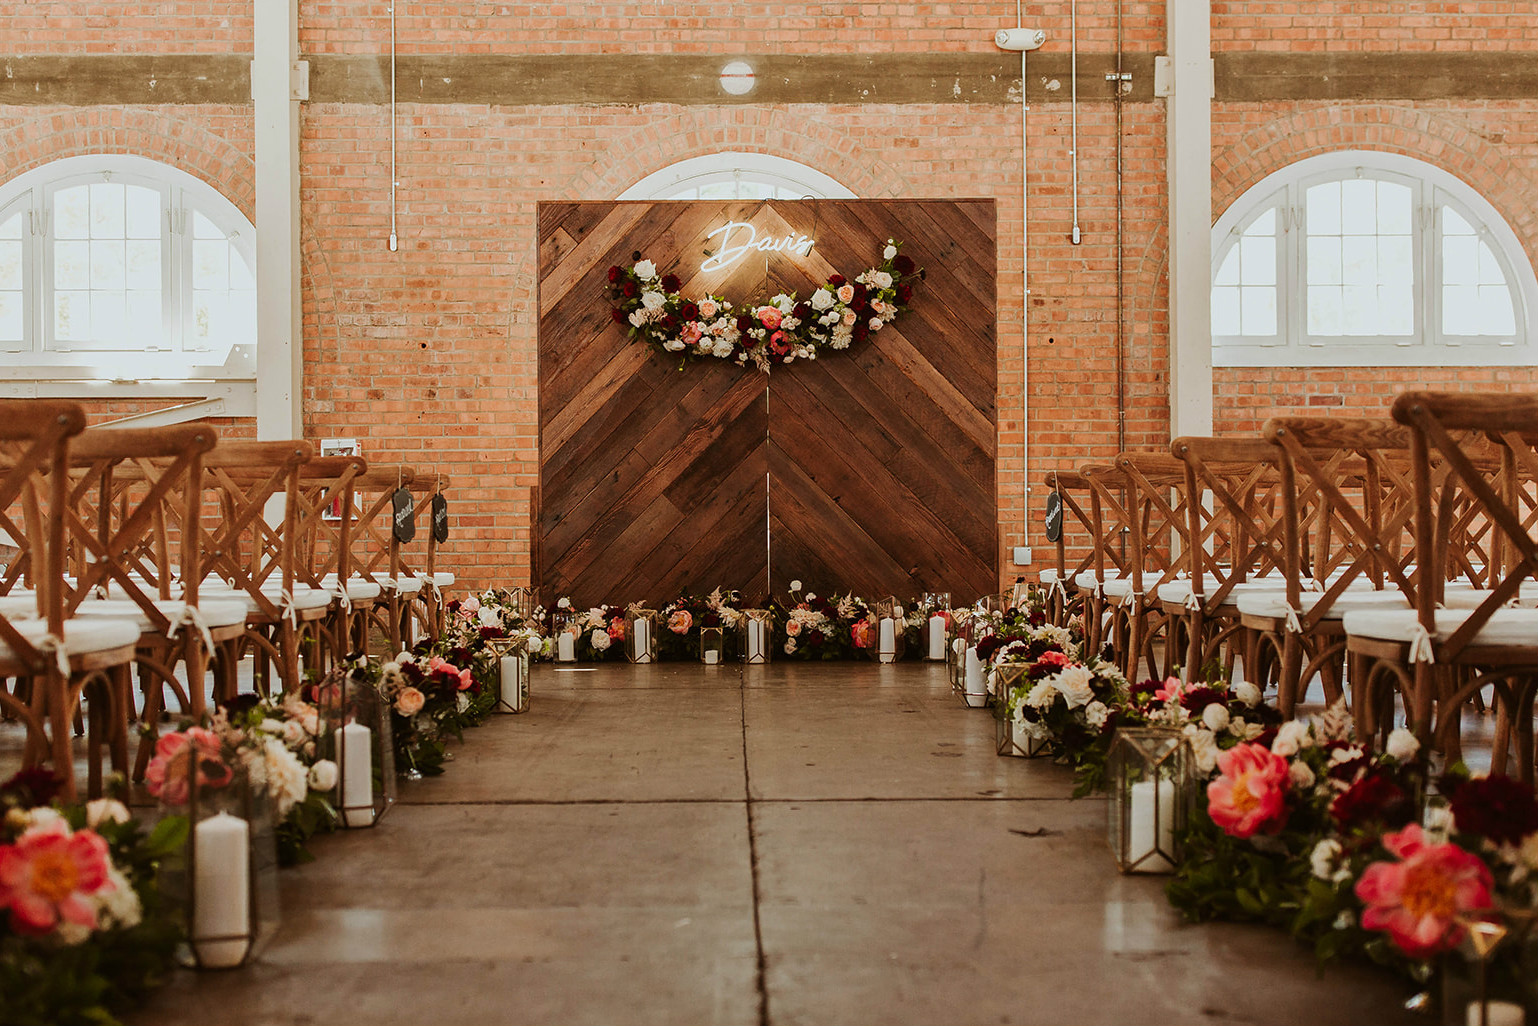 Wedding ceremony setup with bright flowers and wood accents